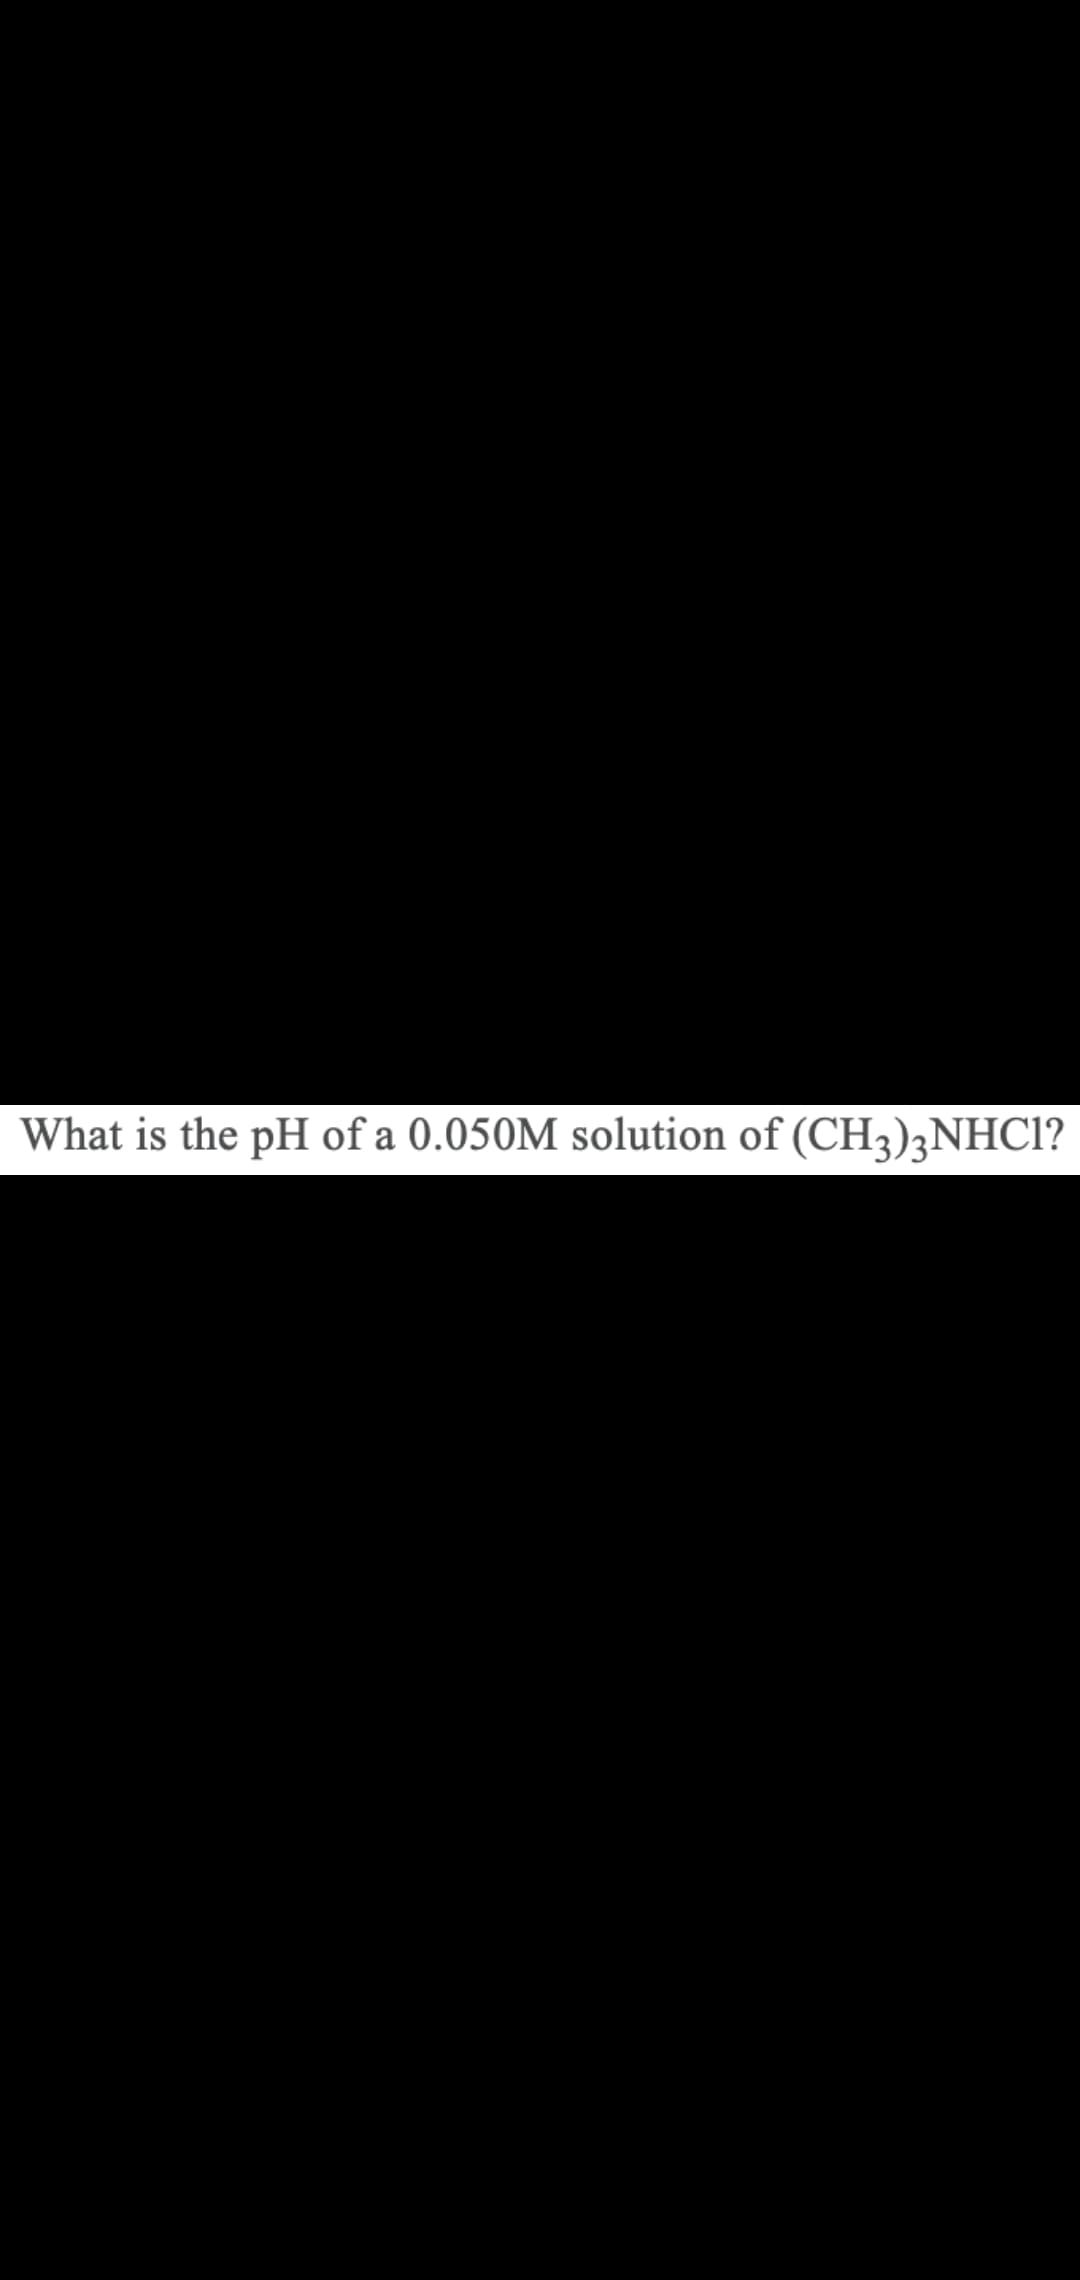 What is the pH of a 0.050M solution of (CH3)3NHC1?
